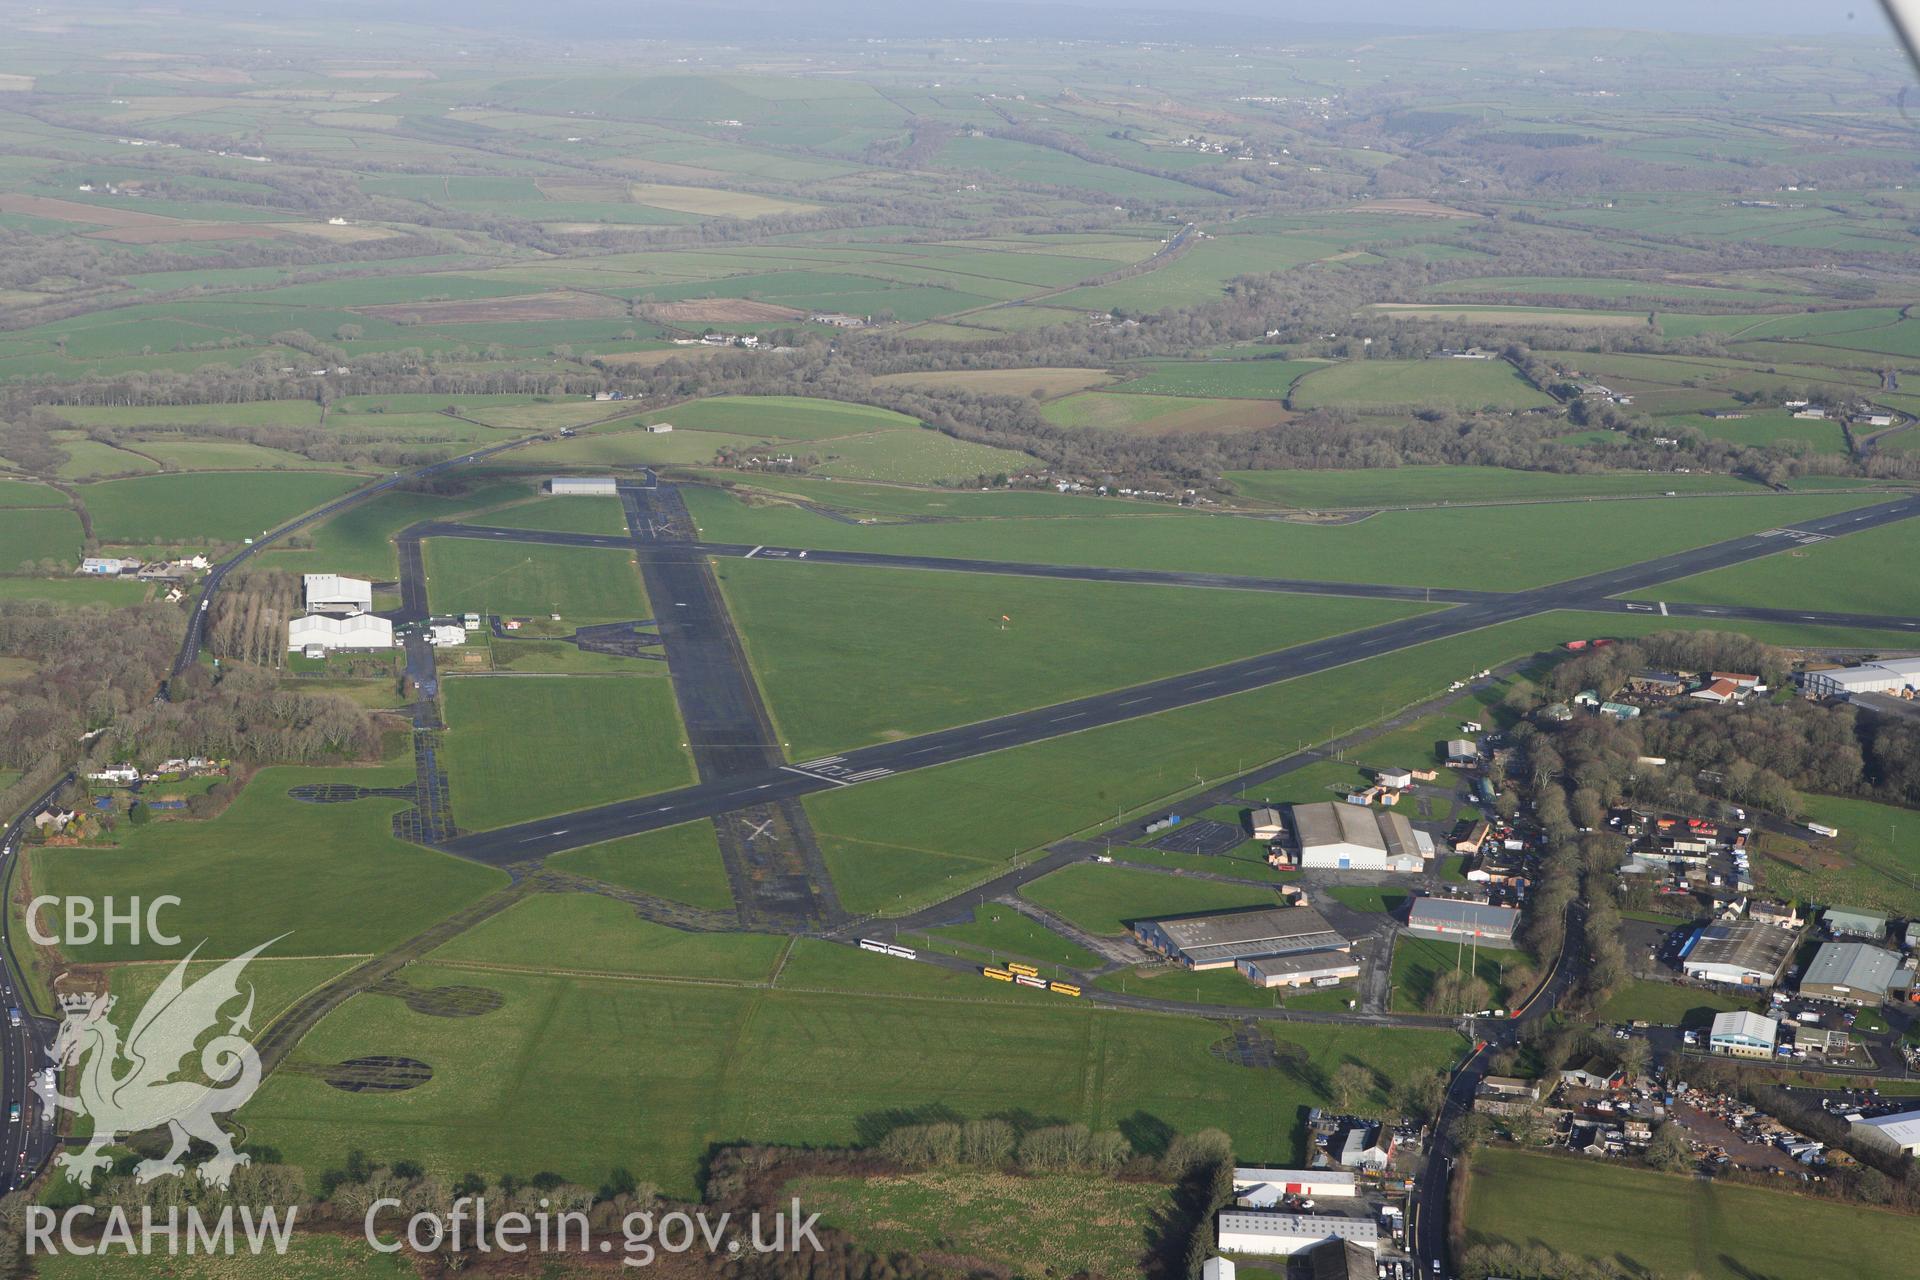 RCAHMW colour oblique photograph of Haverfordwest Airfield. Taken by Toby Driver on 27/01/2012.